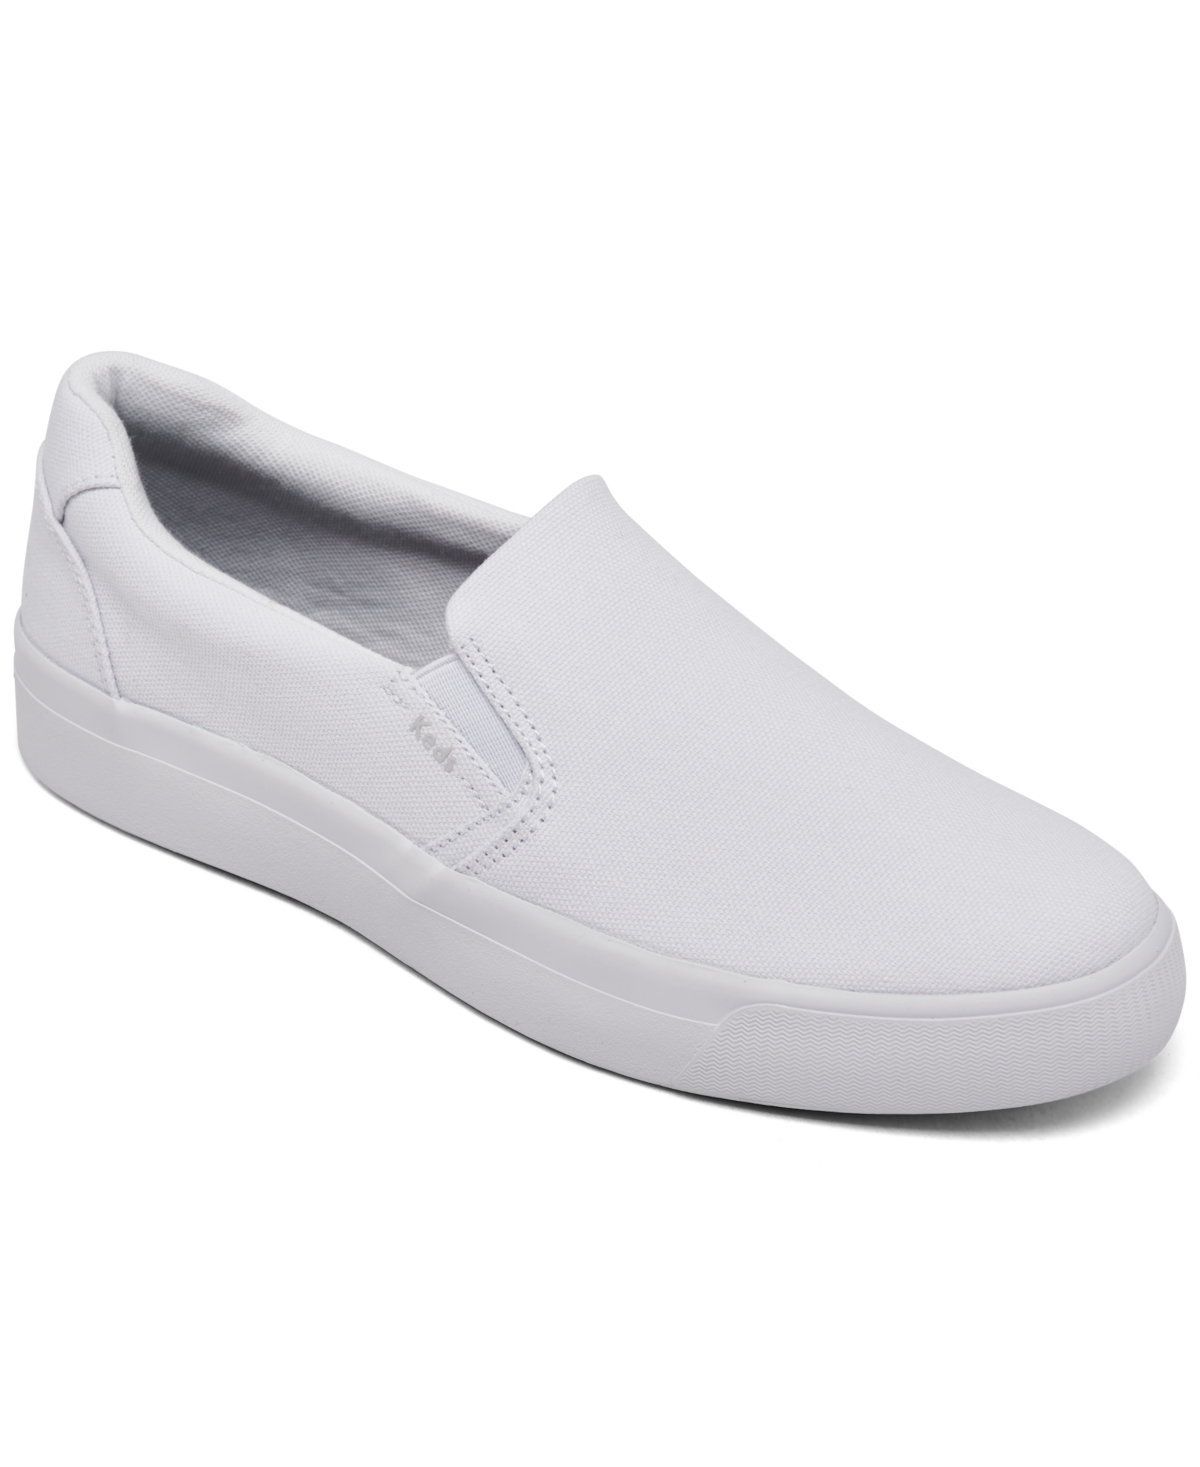 Women's Pursuit Canvas Slip-On Casual Sneakers from Finish Line - White